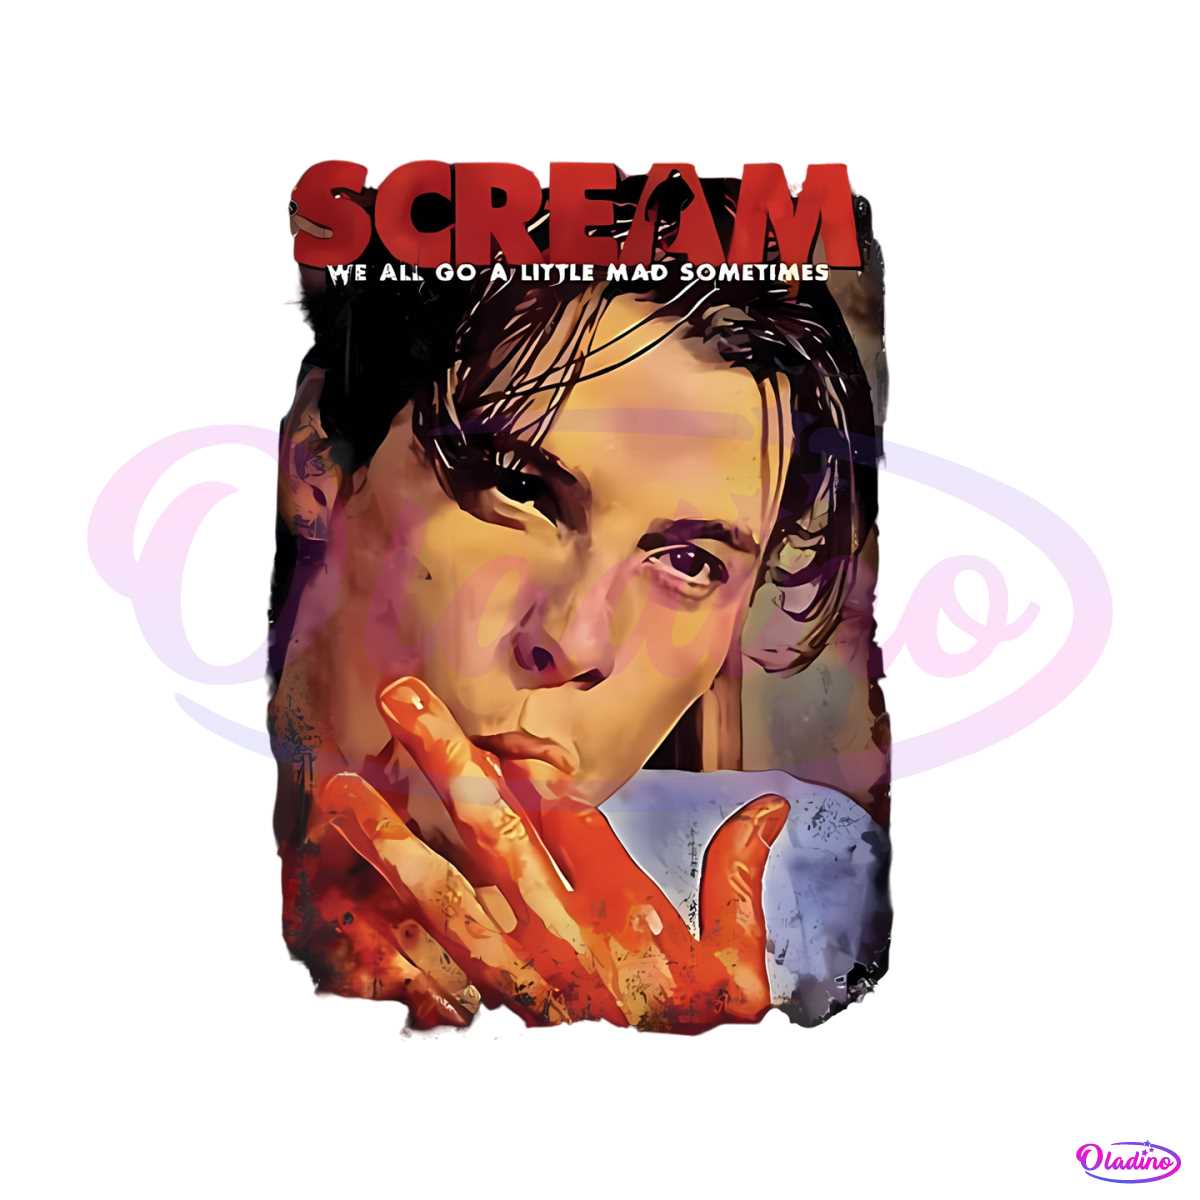 scream-we-all-go-little-mad-sometimes-vintage-halloween-png